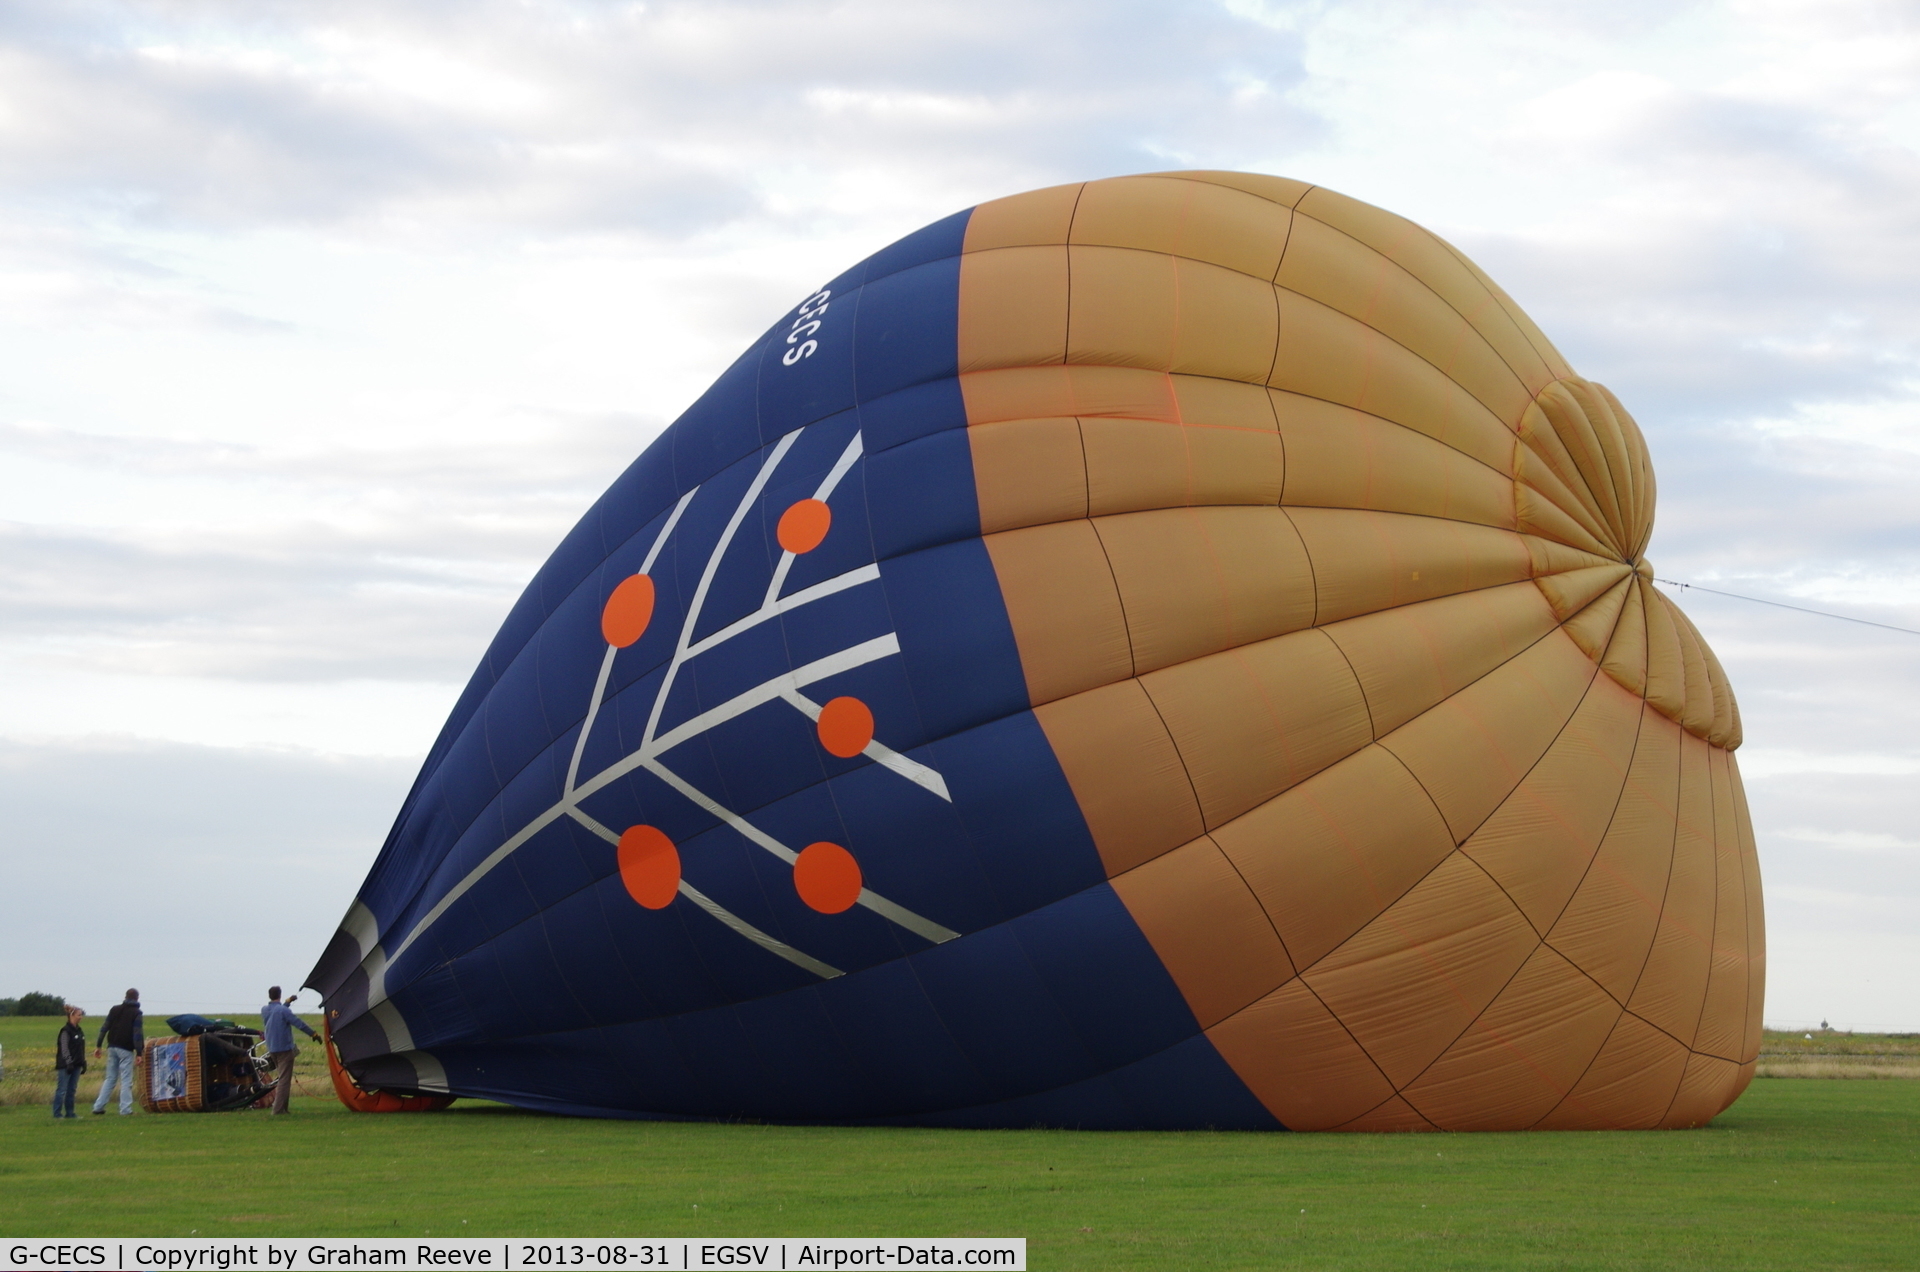 G-CECS, 2006 Lindstrand Hot Air Balloons Ltd LBL 105A C/N 1121, Being inflated prior to flight.